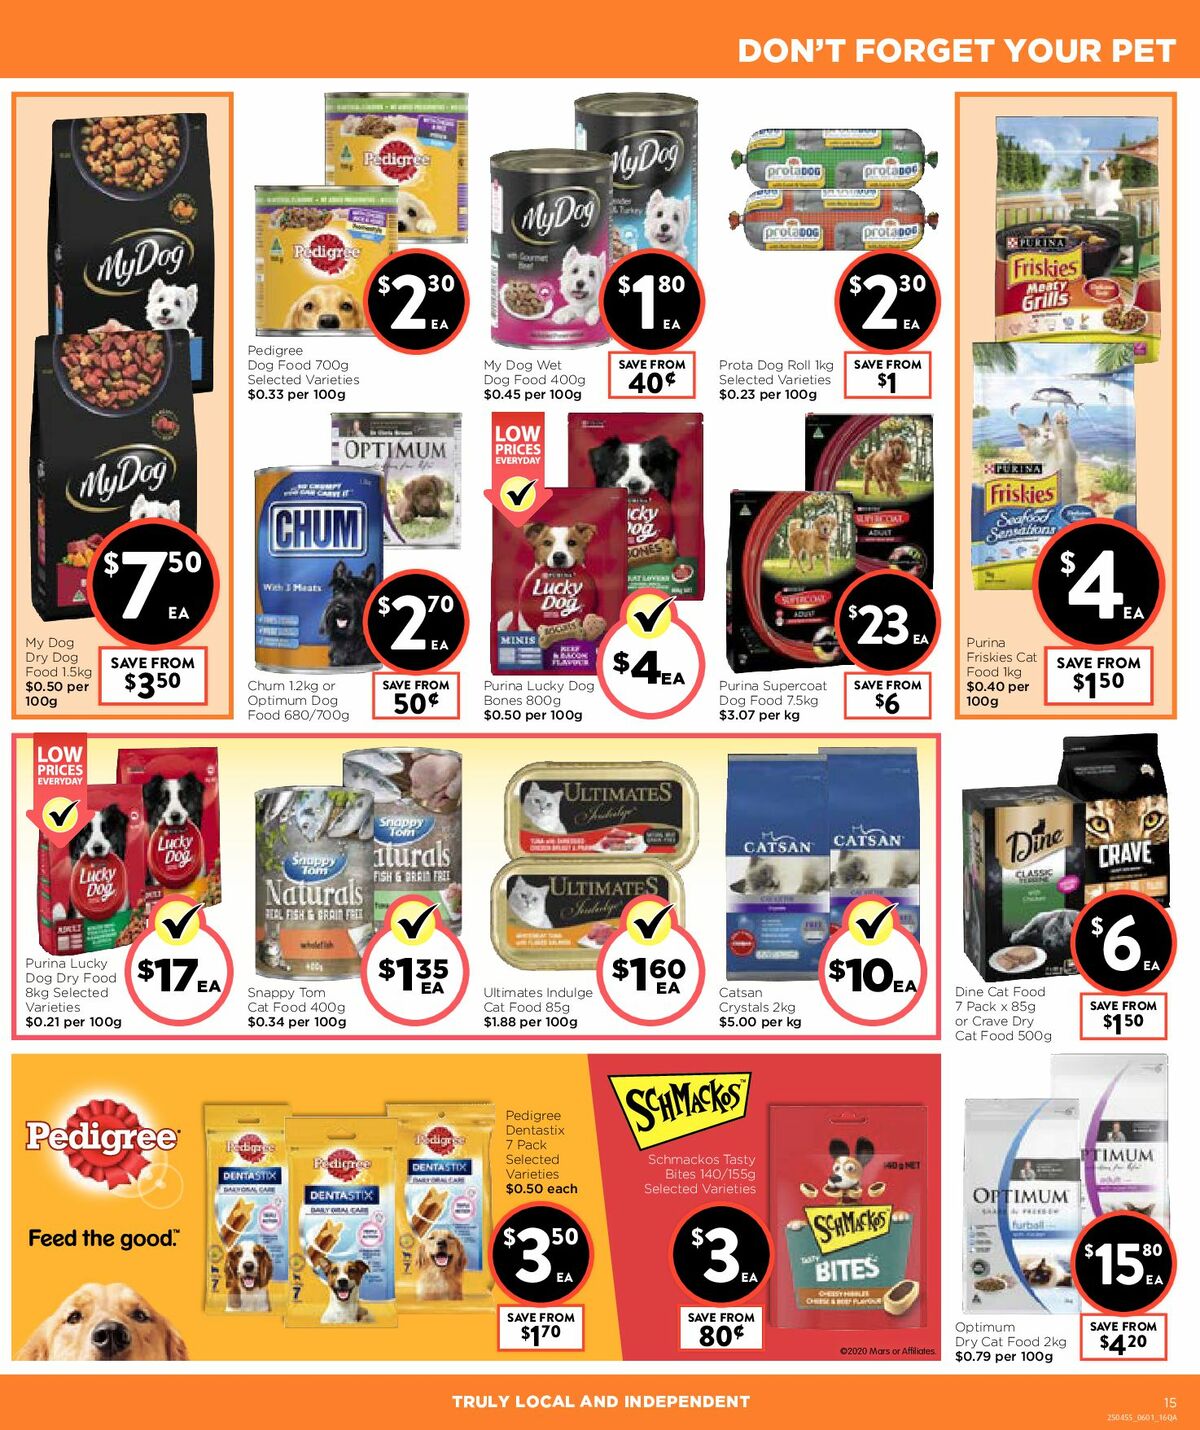 FoodWorks Supermarket Catalogues from 6 January